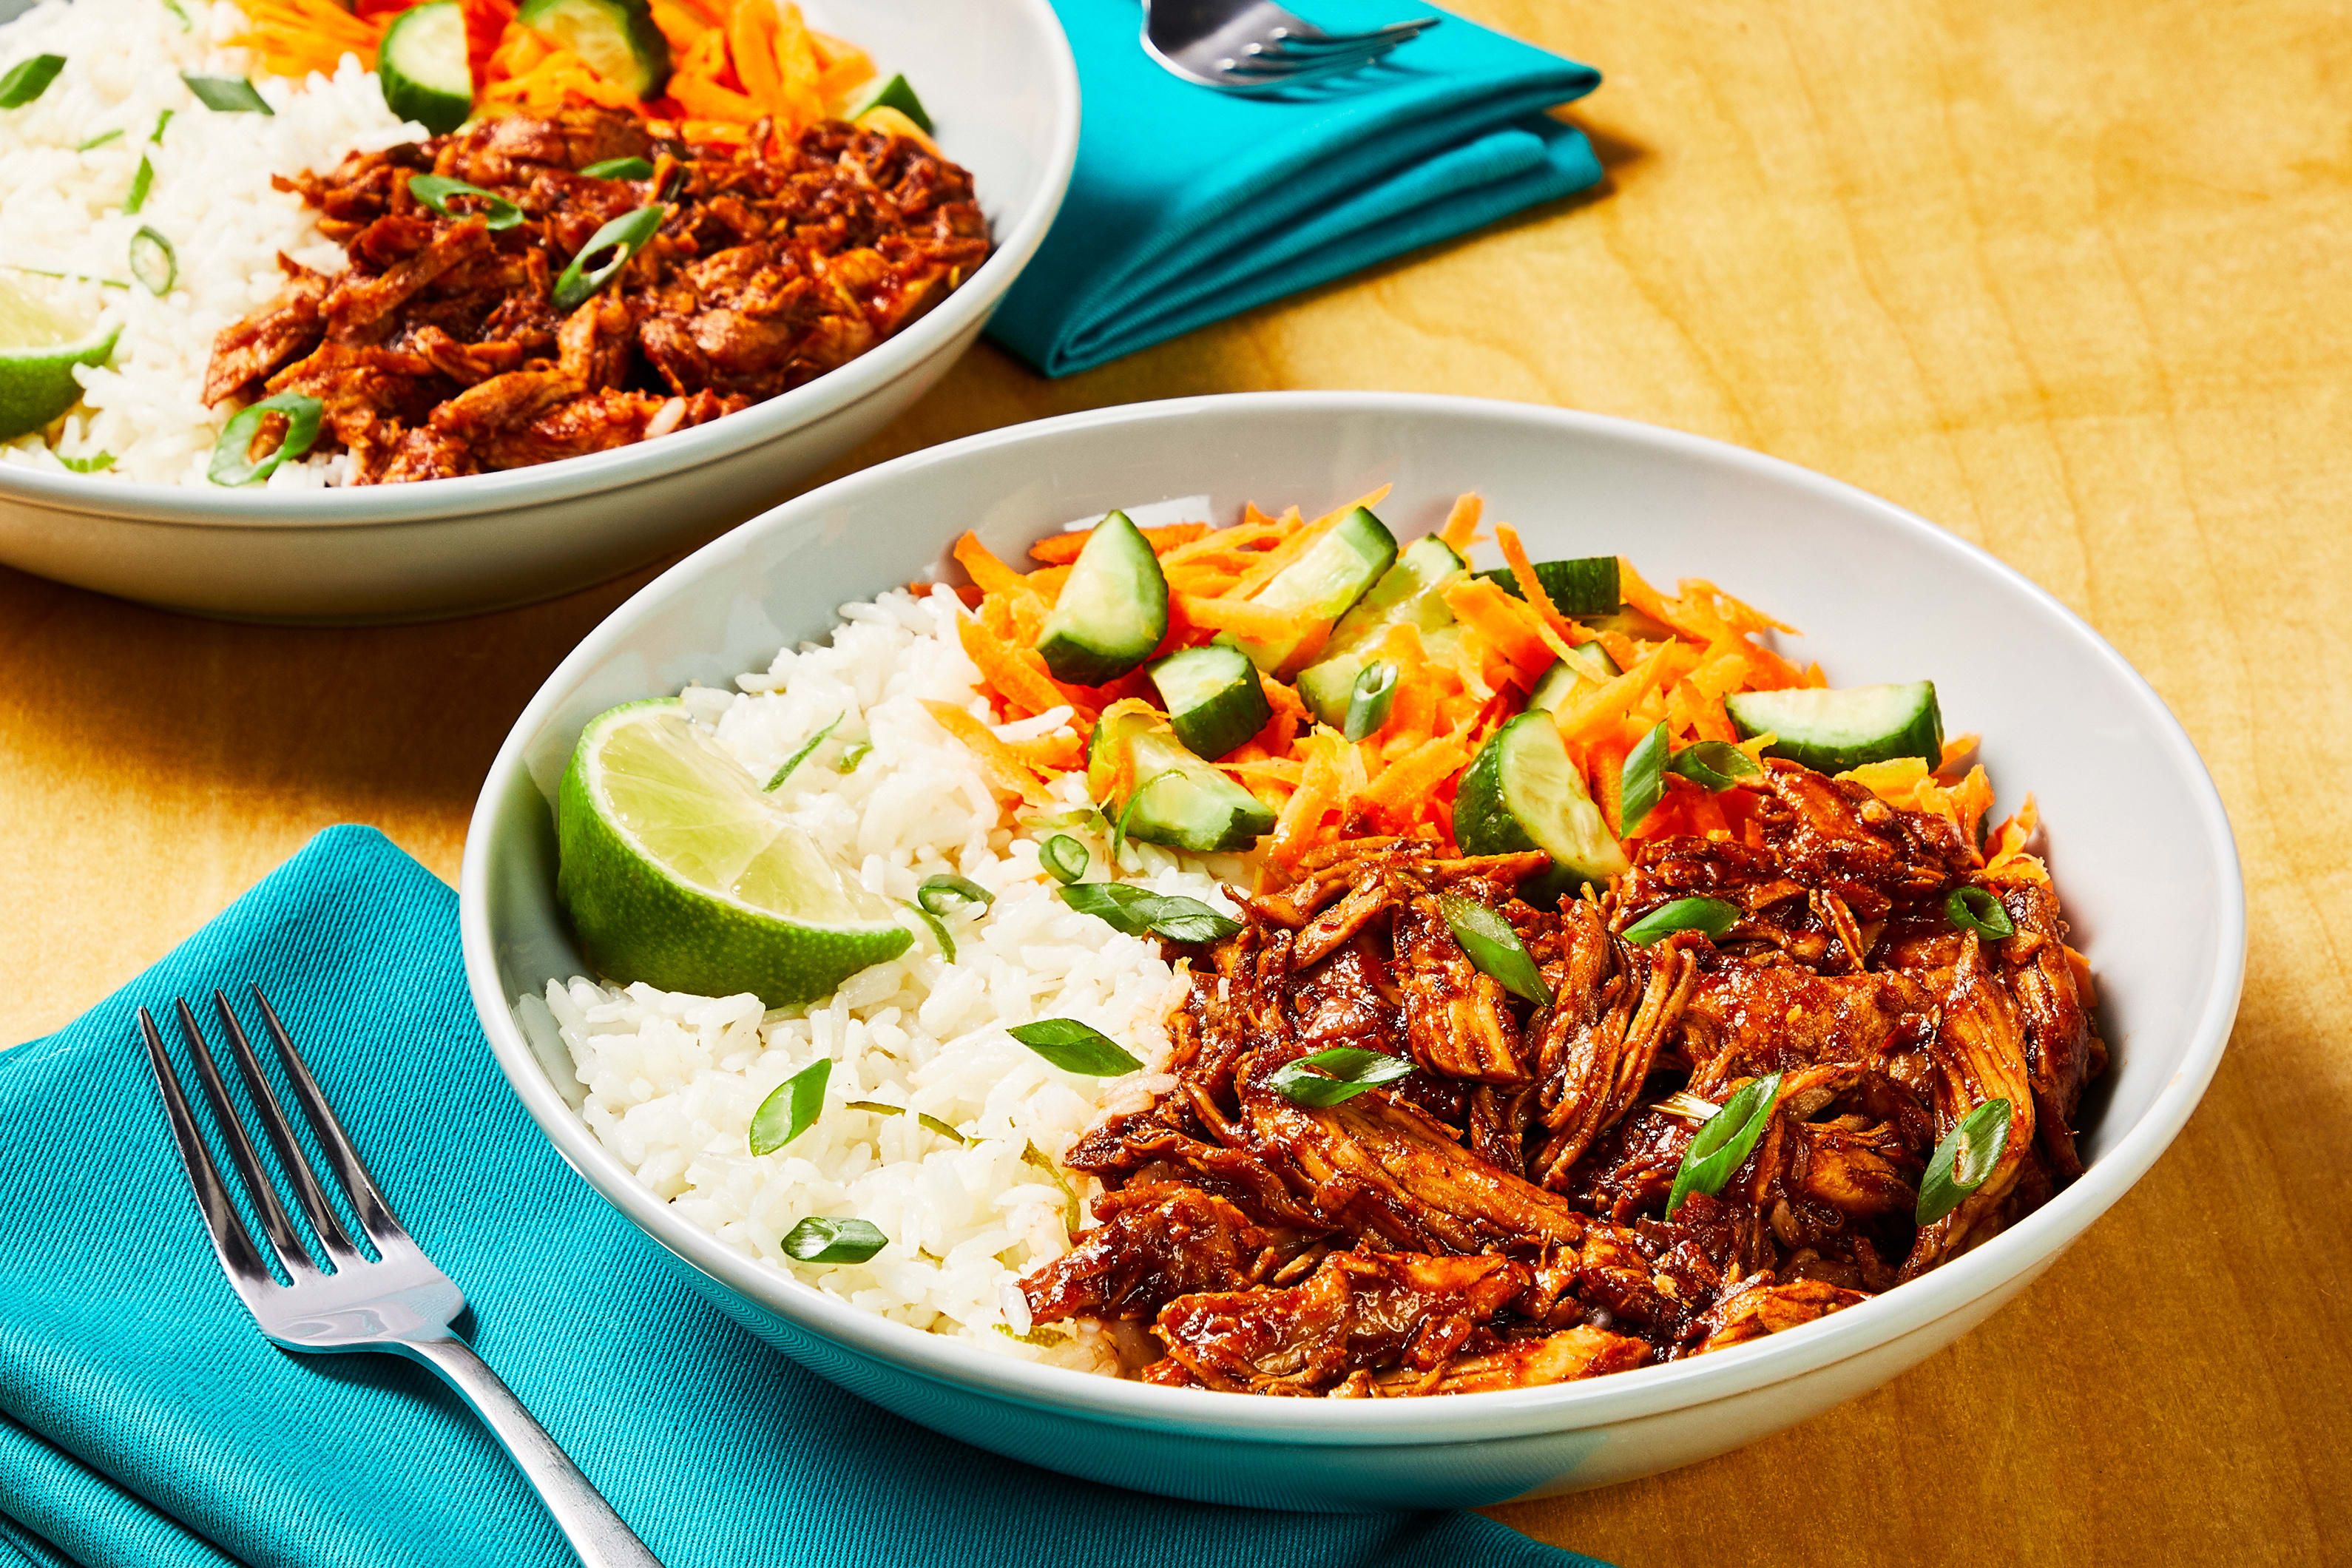 https://images.everyplate.com/f_auto,fl_lossy,q_auto/everyplate_s3/image/ginger-soy-bbq-pulled-chicken-bowls-043aa978.jpg